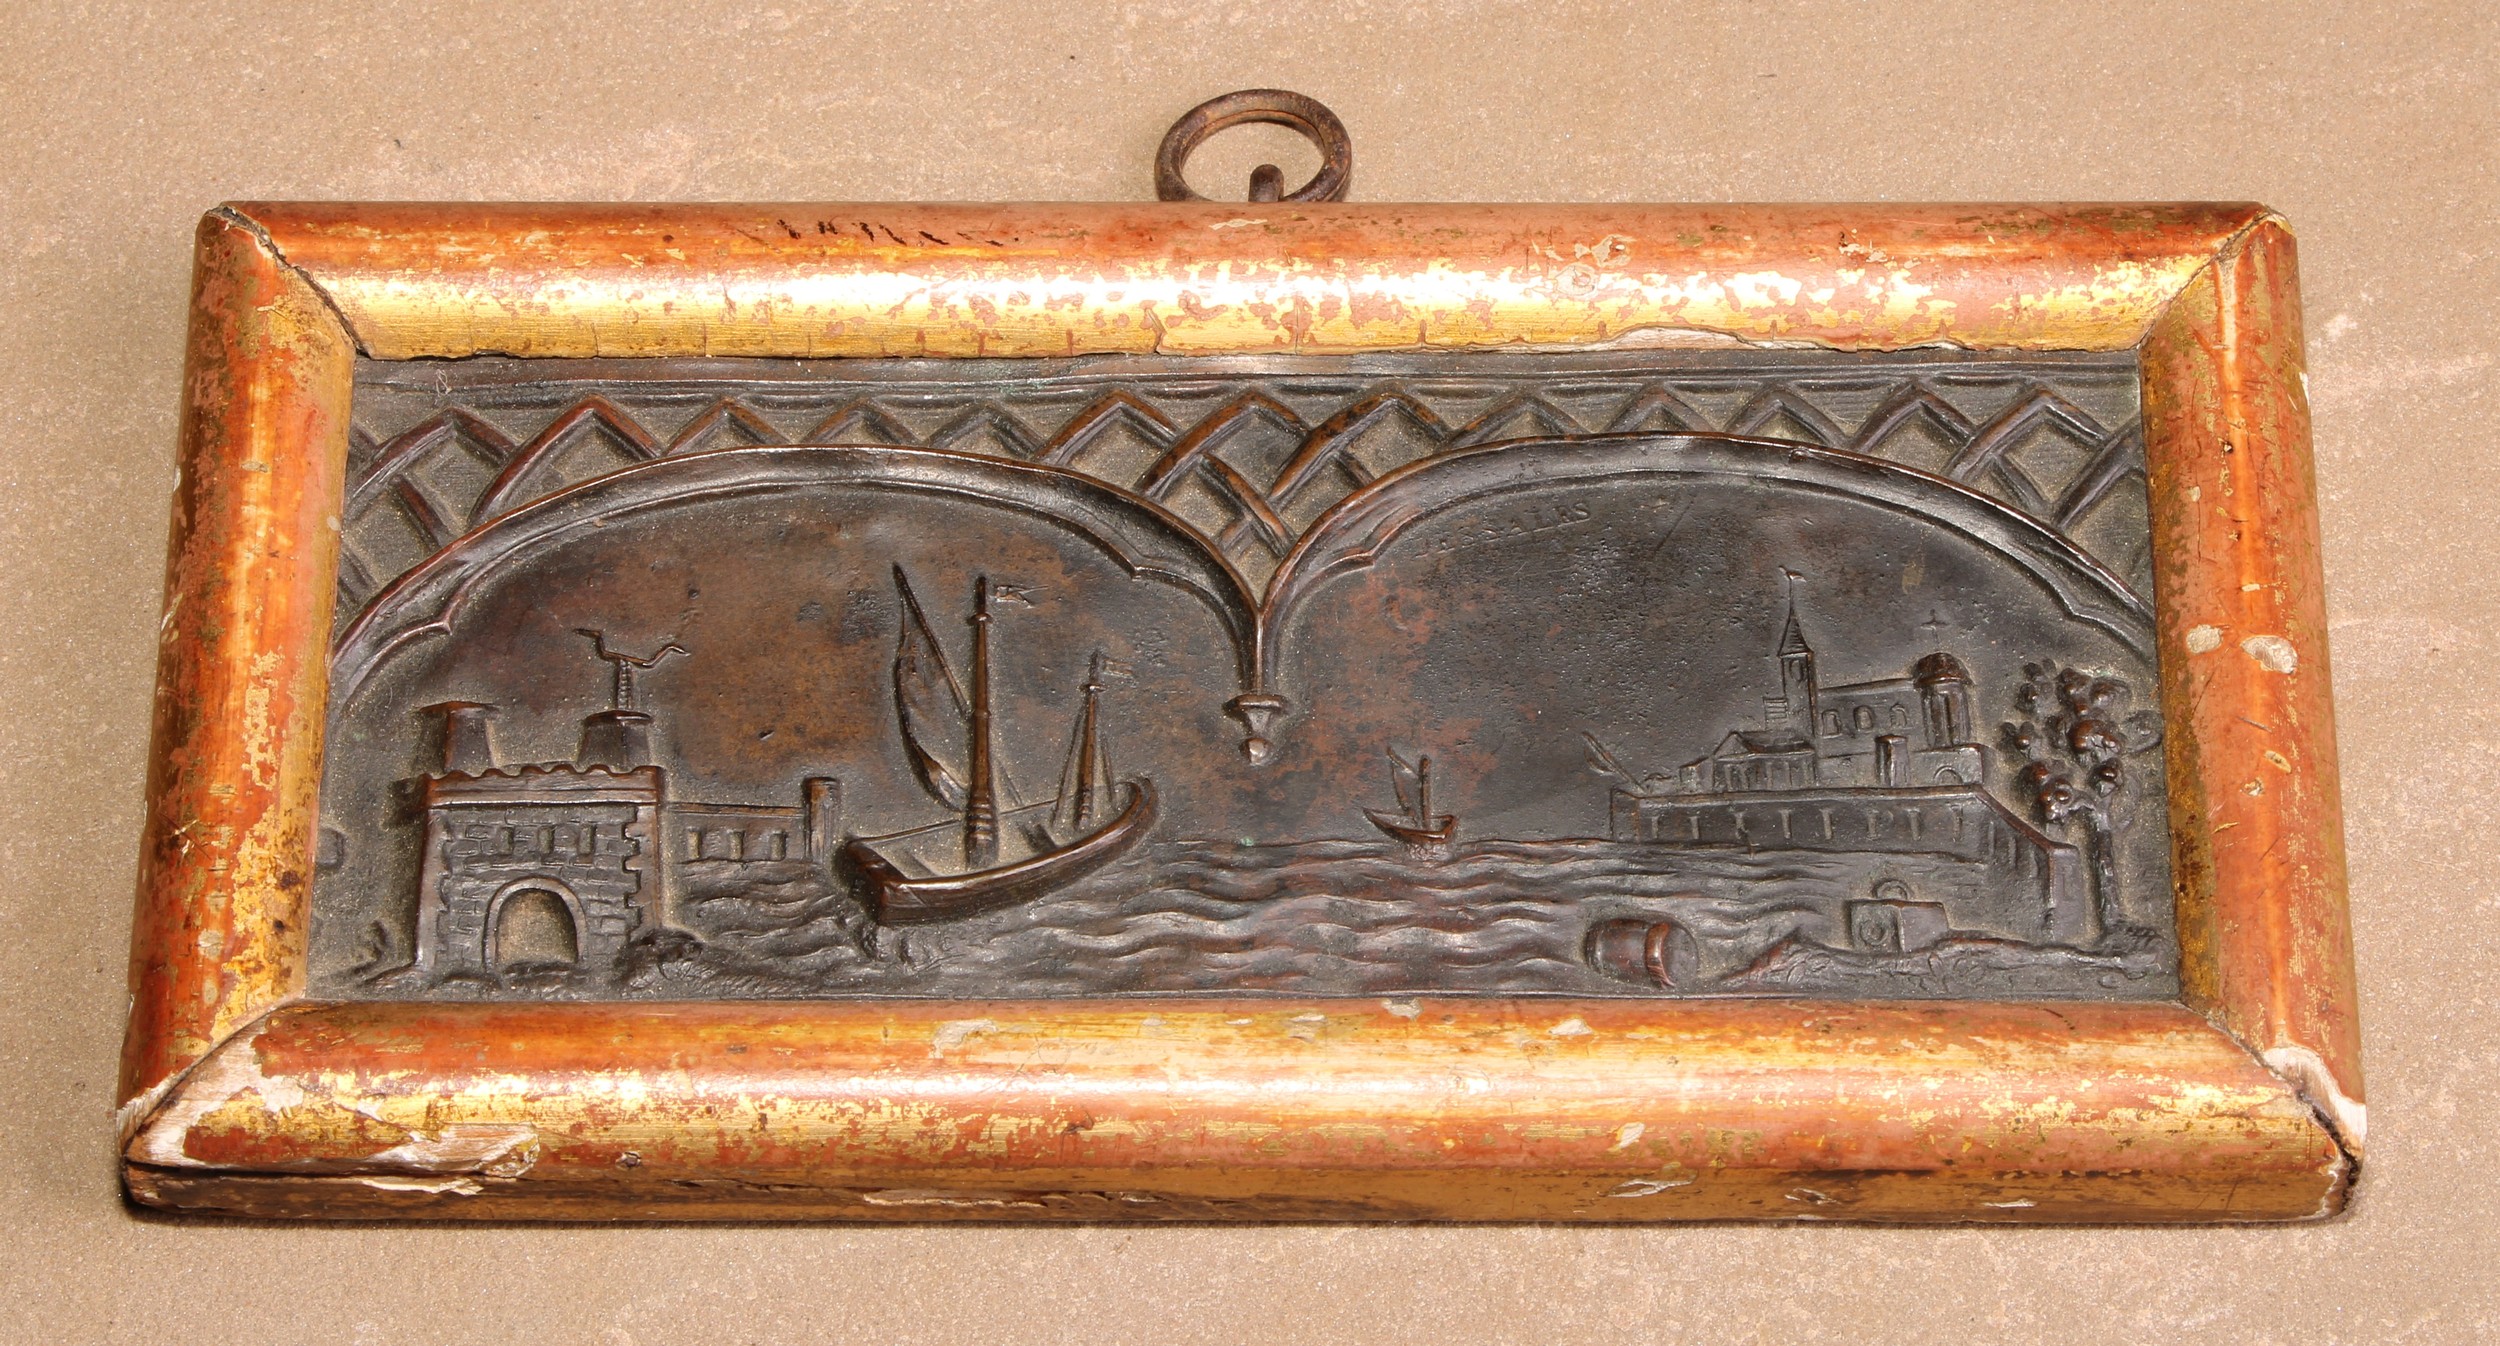 A 19th century bas relief, depicting a Continental harbour scene, gilt frame, 8.5cm x 16.5cm overall - Image 2 of 3